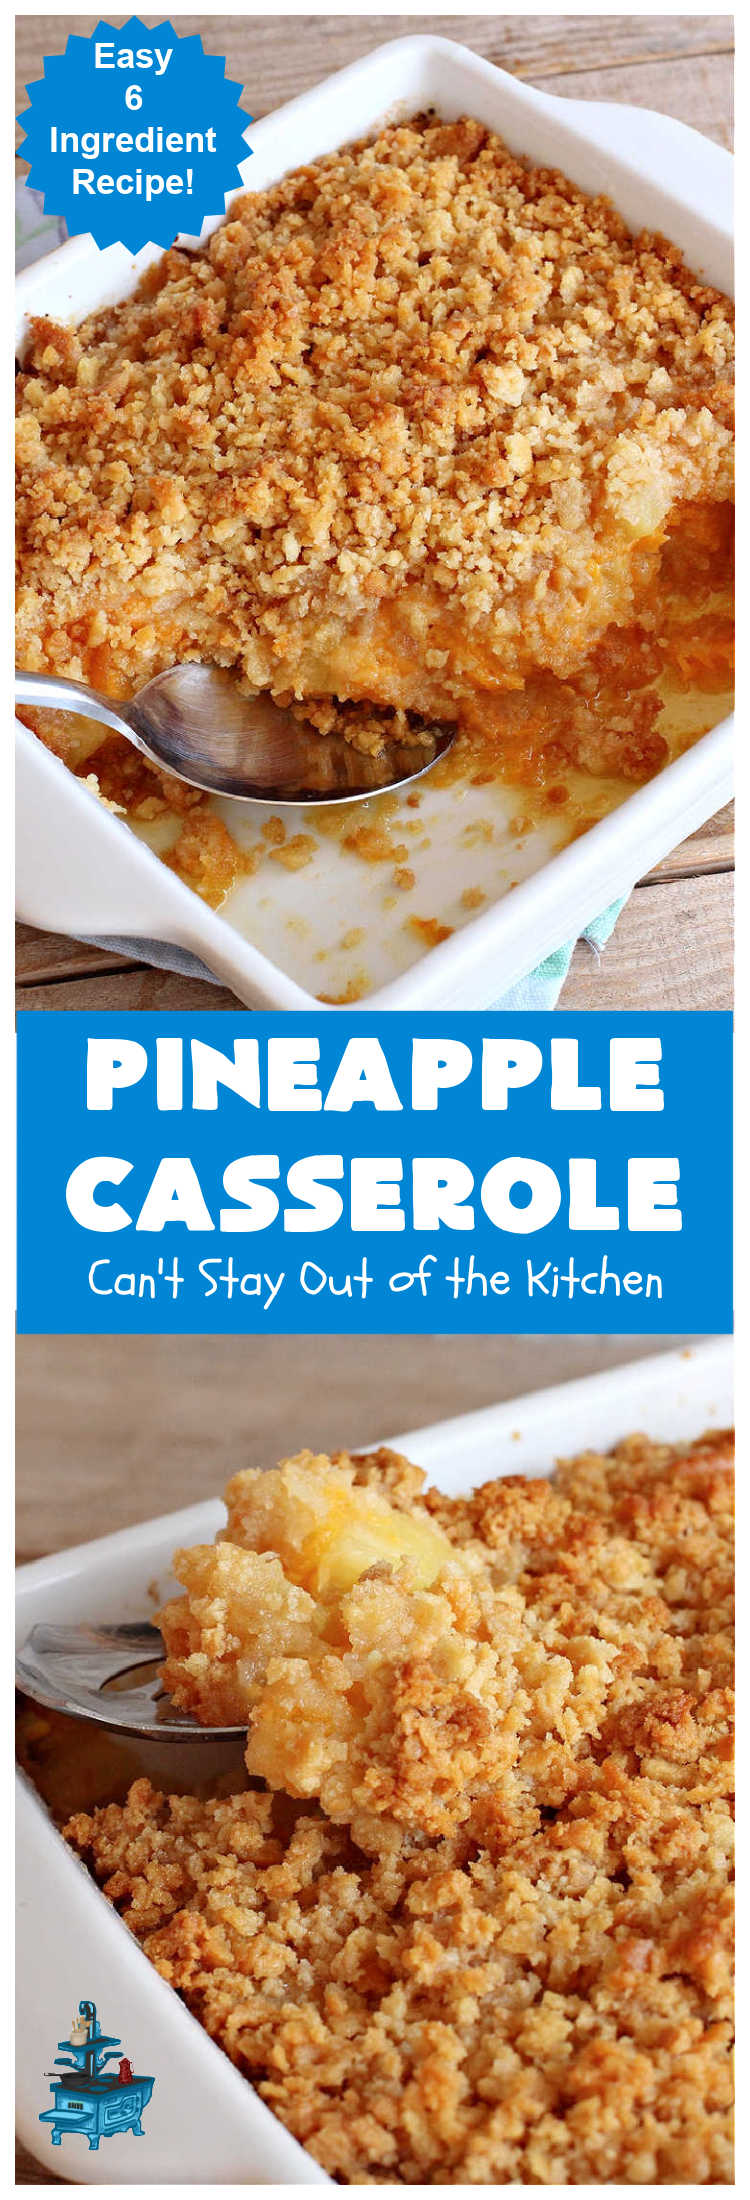 Pineapple Casserole | Can't Stay Out of the Kitchen